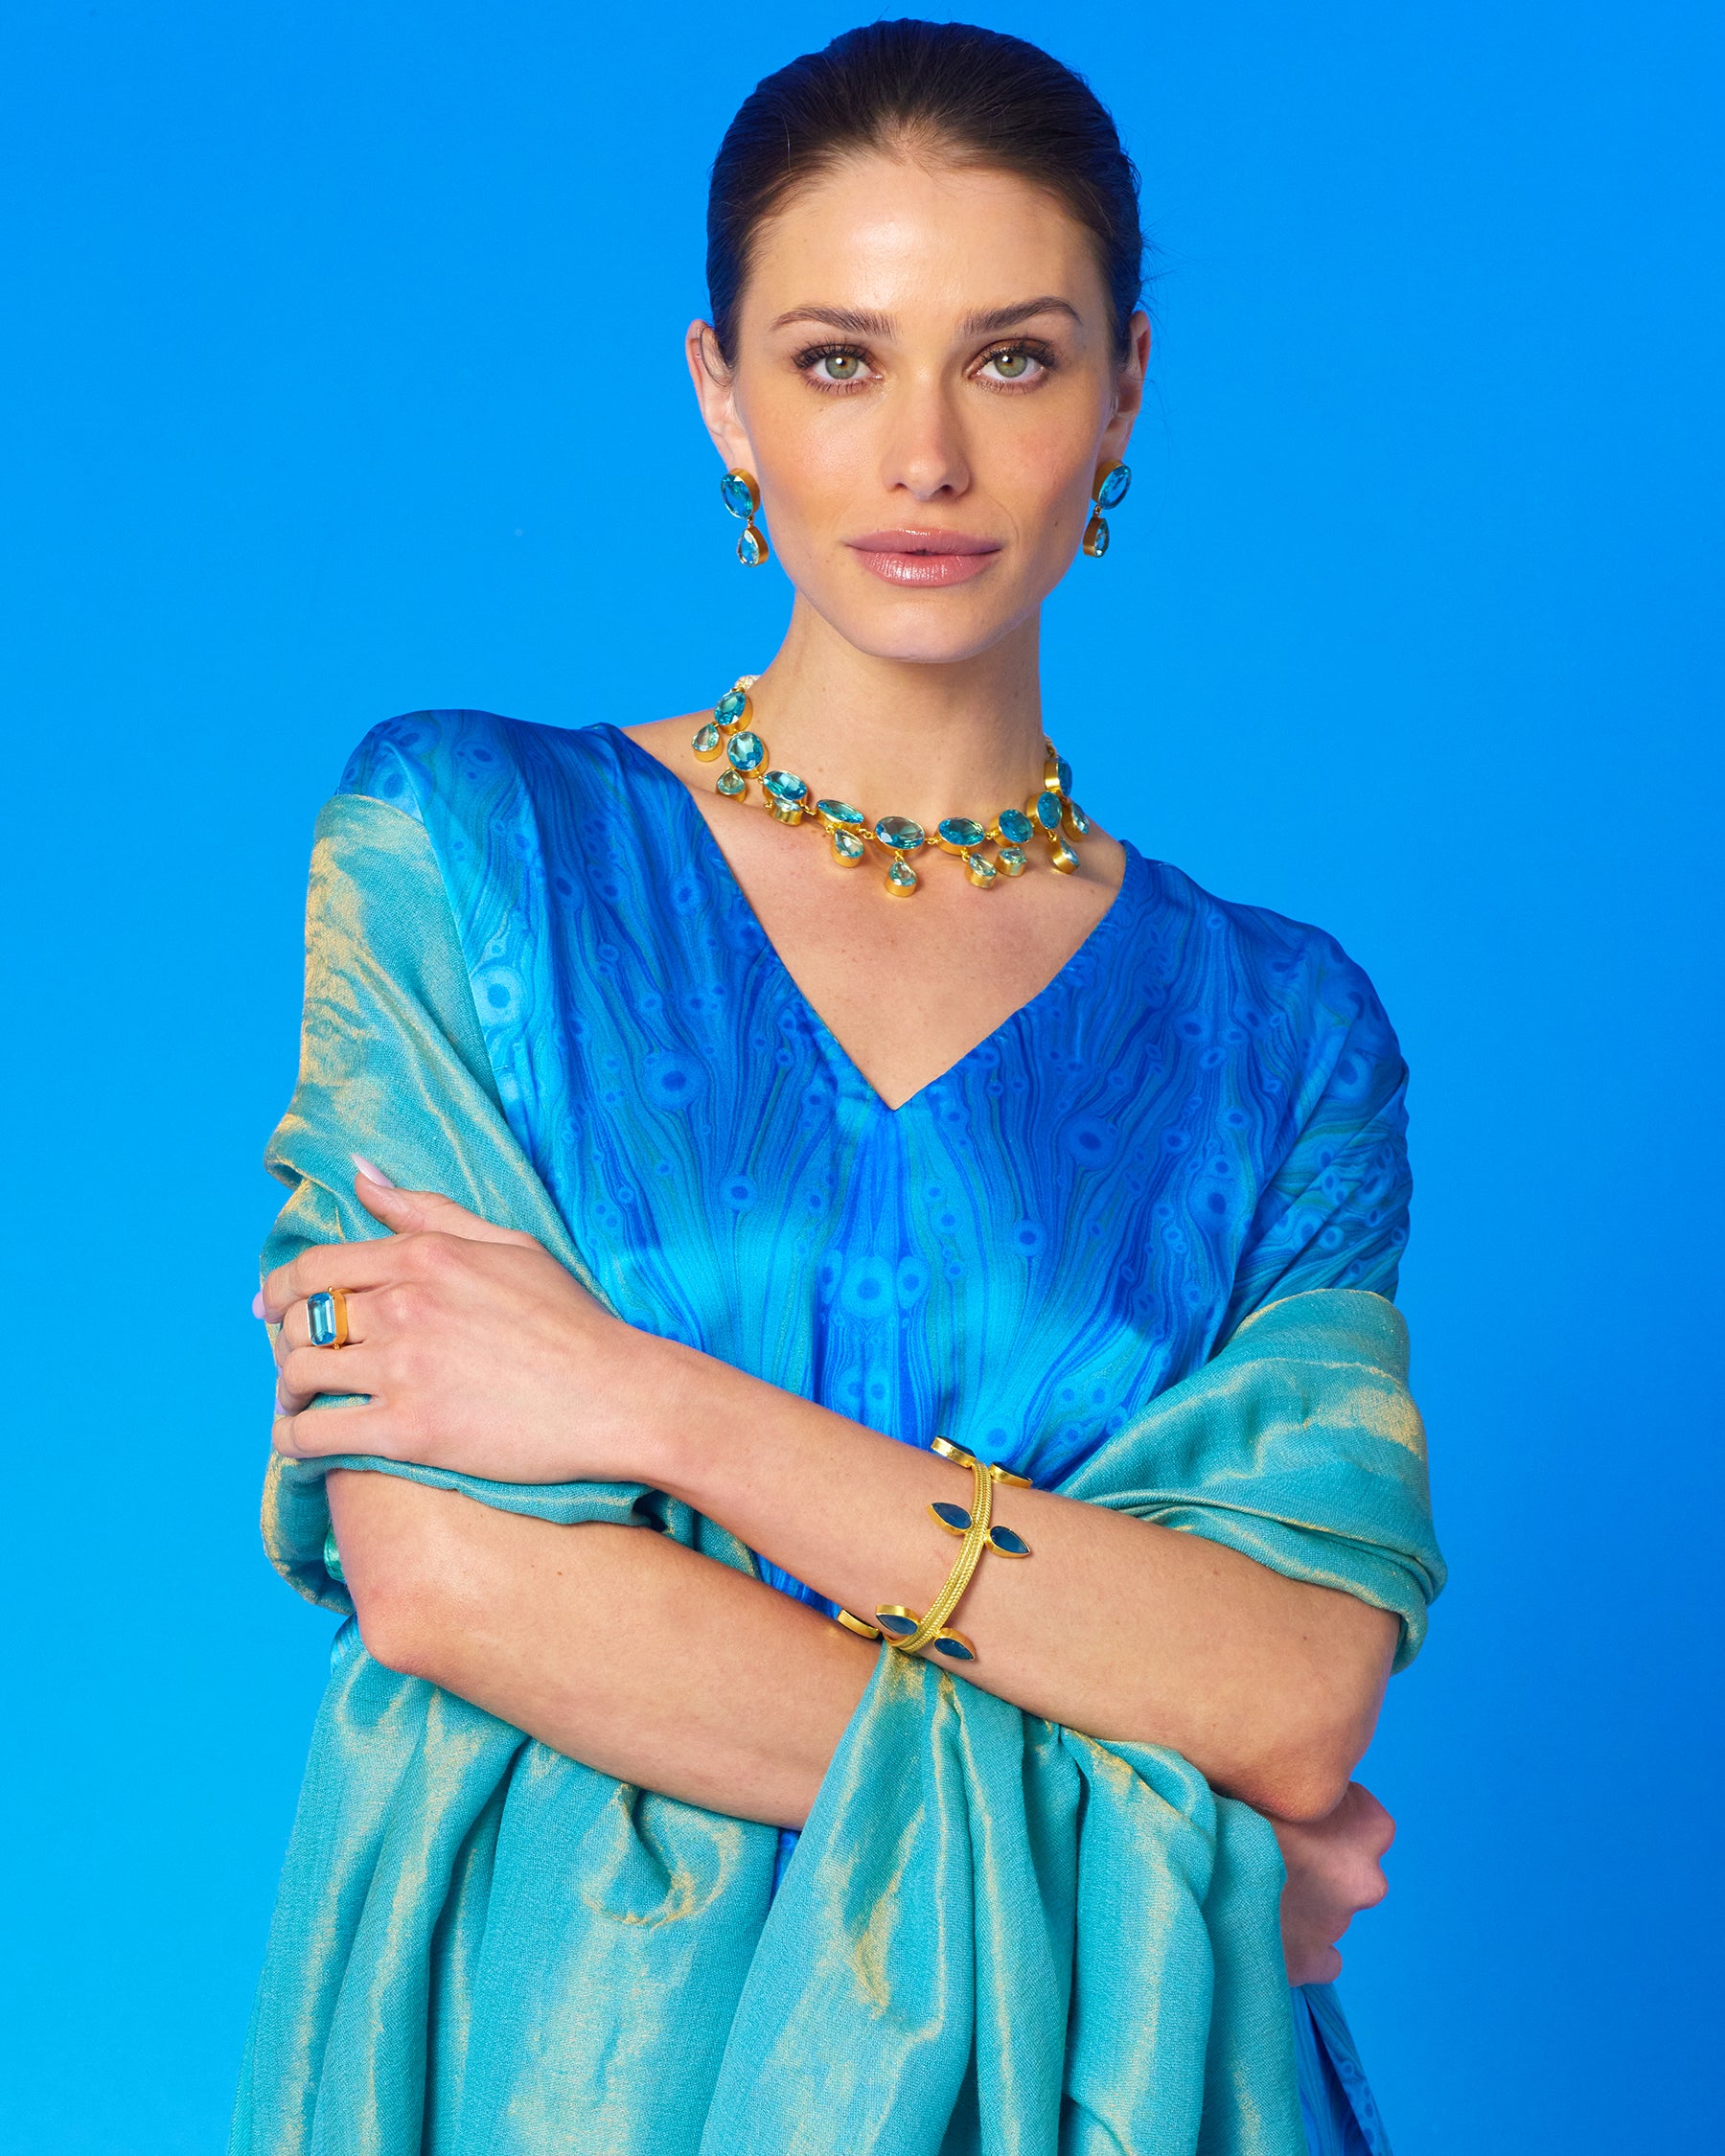 Calliope Long Silk Dress in Sea Nymph Blues with the Josephine Pashmina Shawl in Turquoise Gold Shimmer draped over the shoulders